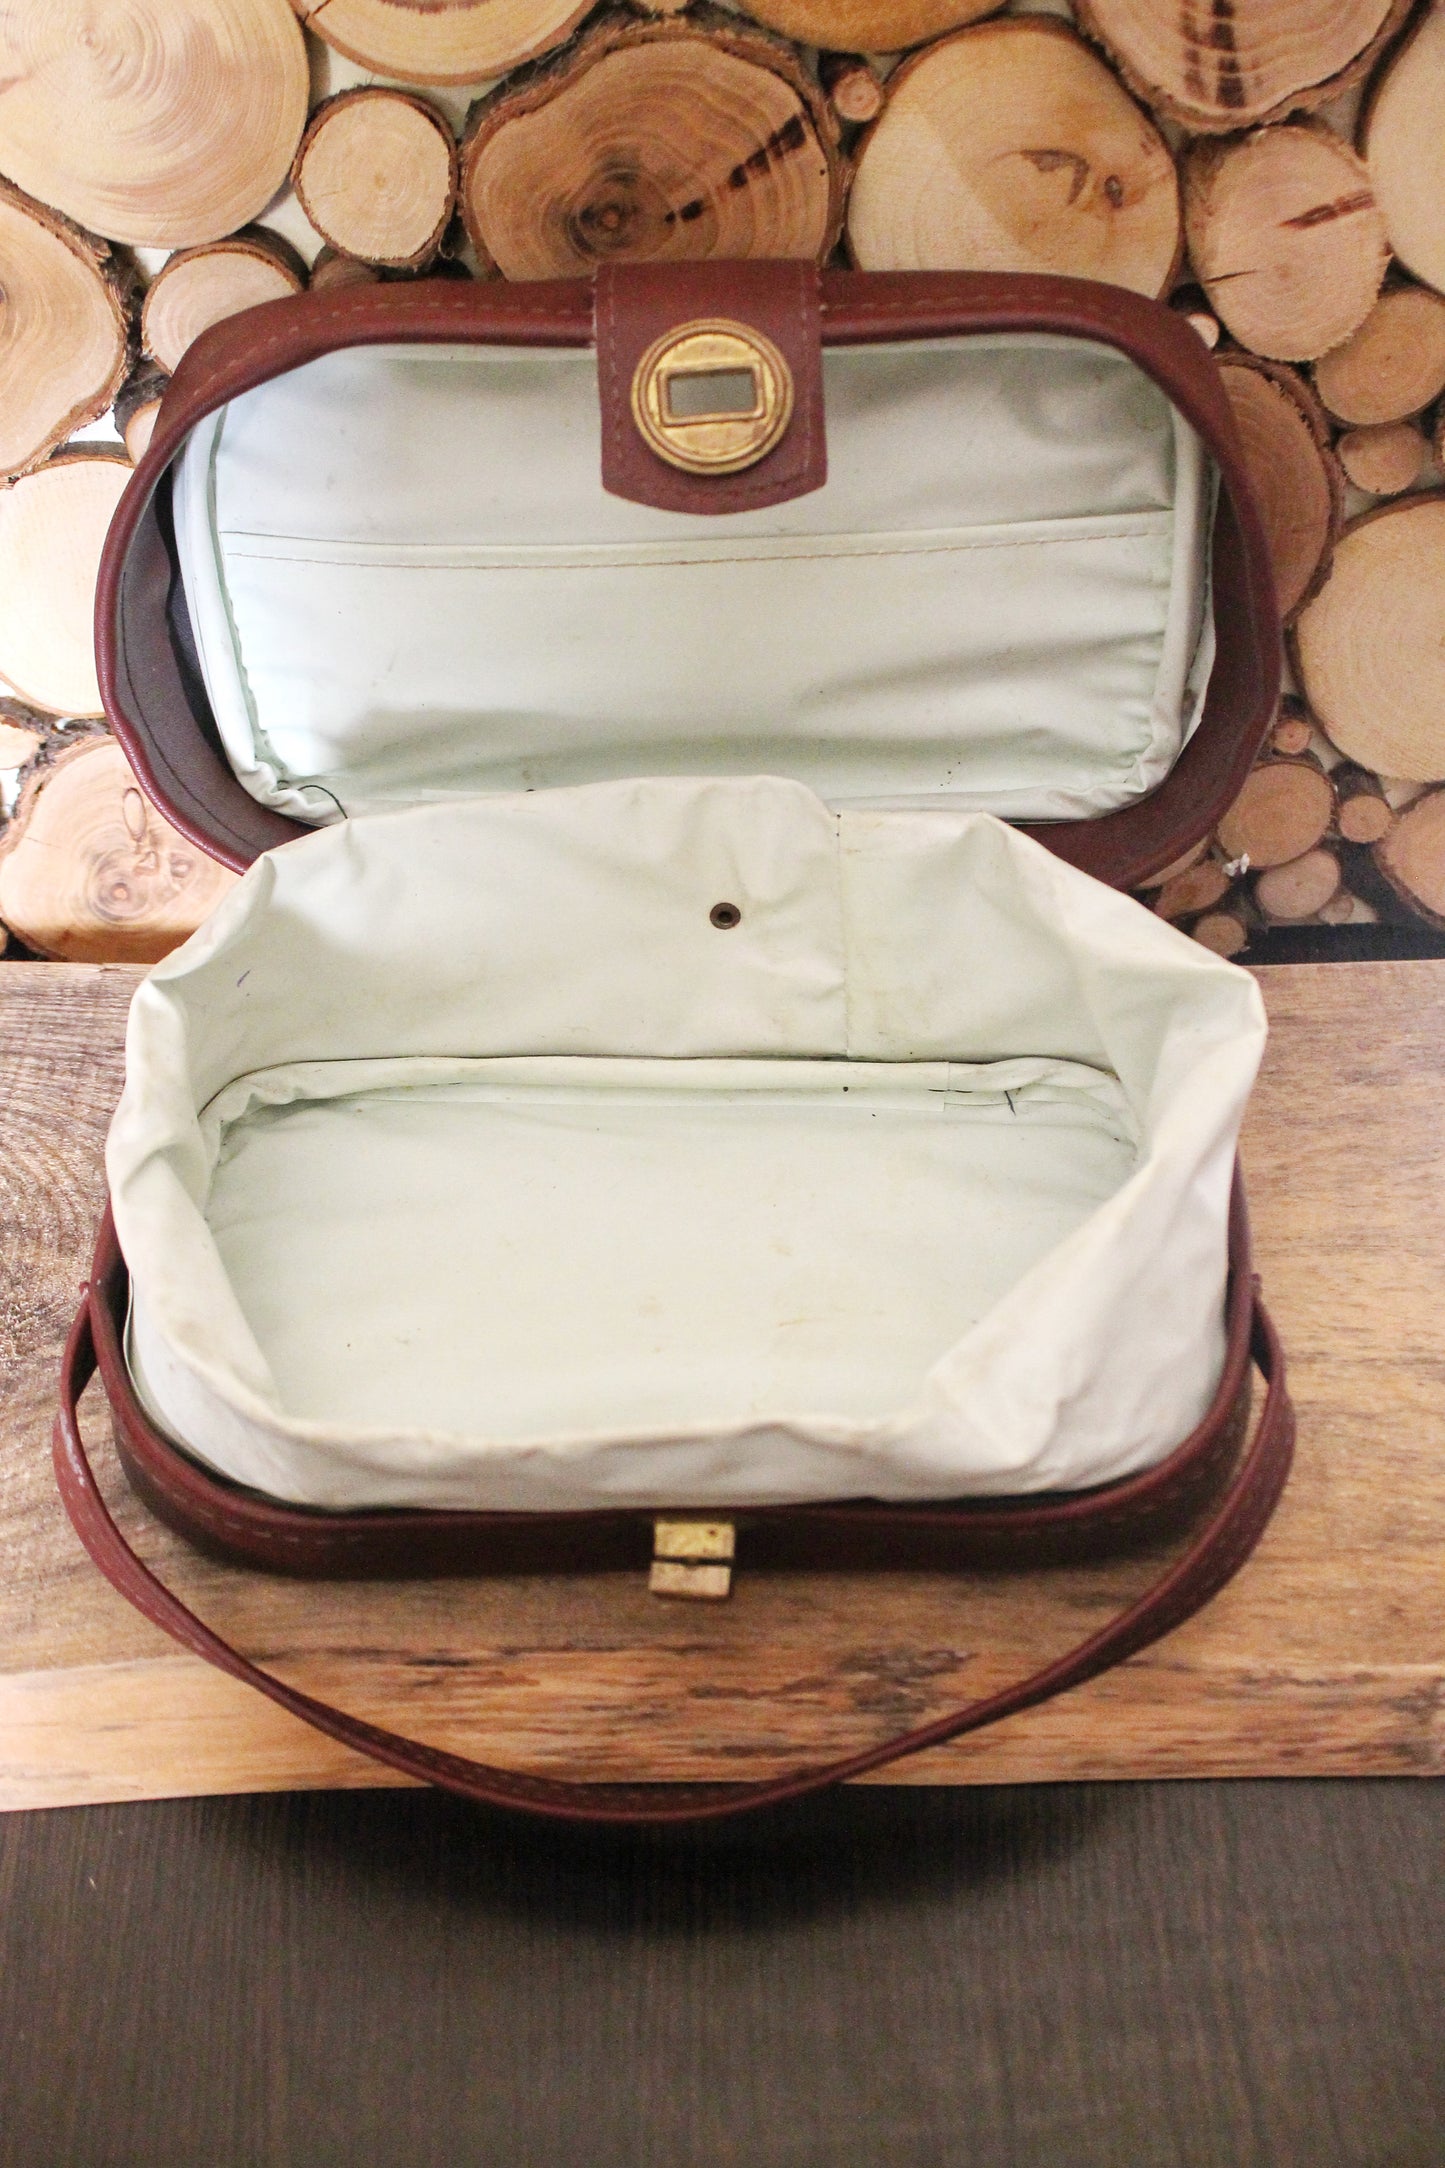 Vintage USSR medicine first aid kit 9.1 inches - Medical box - made of faux leather - First aid box - Soviet Medicine cabinet